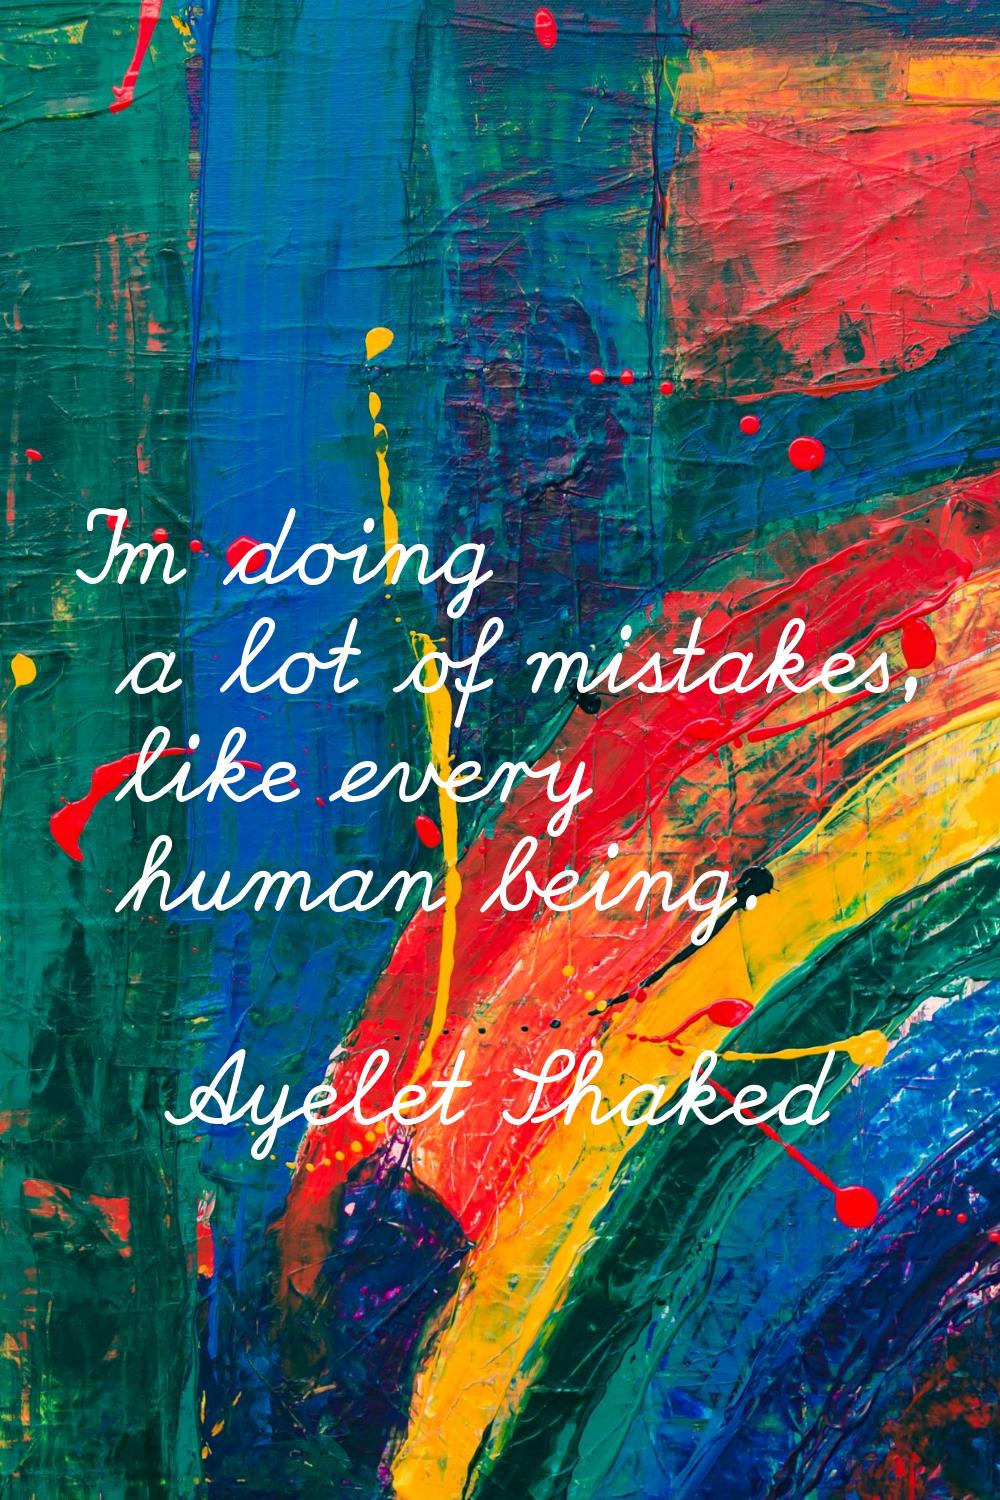 I'm doing a lot of mistakes, like every human being.